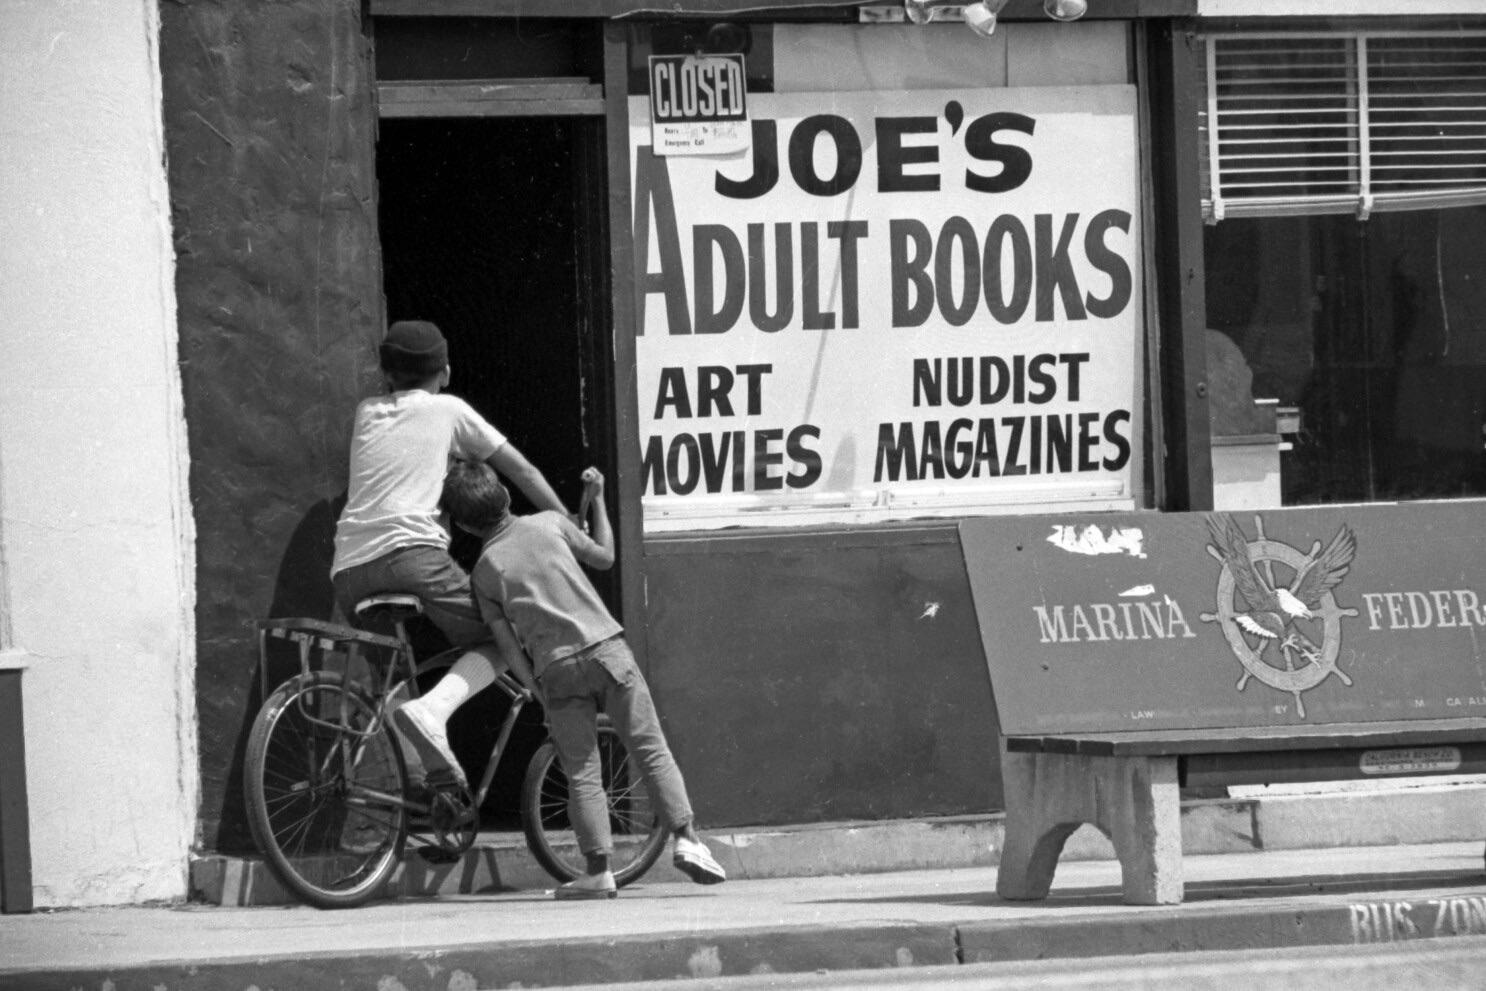 Two boys stop to investigate an adult book store in Lennox, Los Angeles. August 1969.jpeg